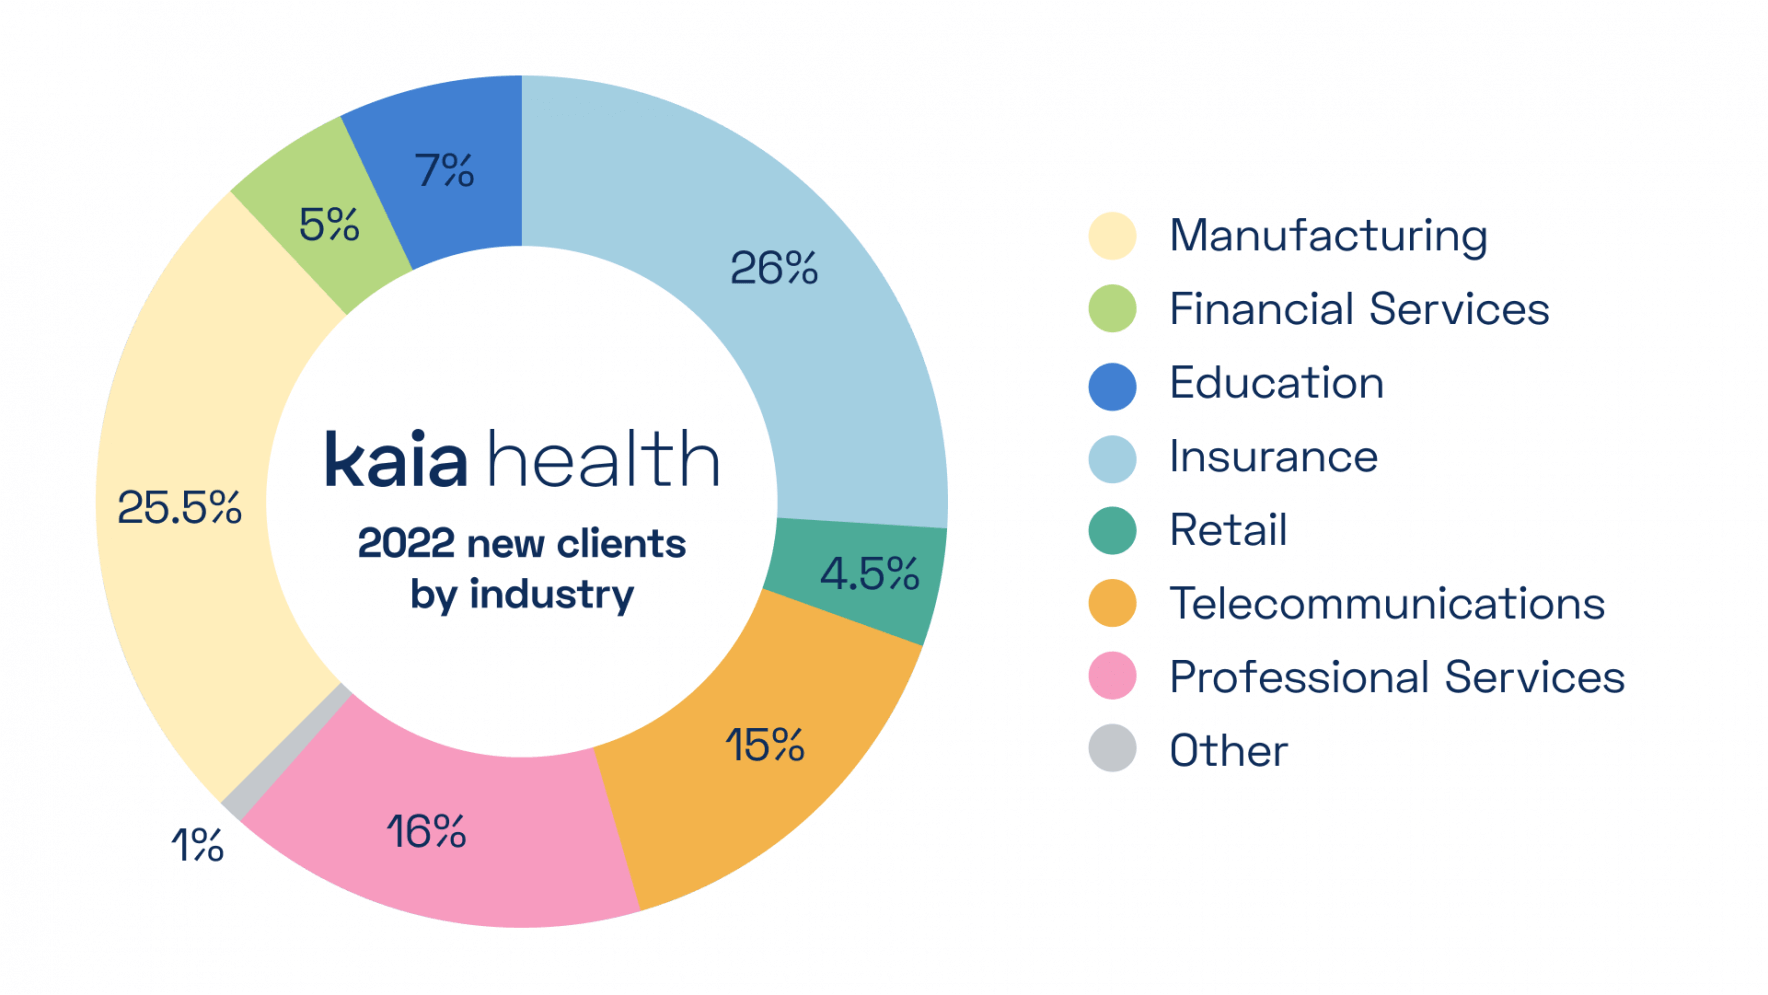 A pie chart showing Kaia health 2022 new clients by industry.